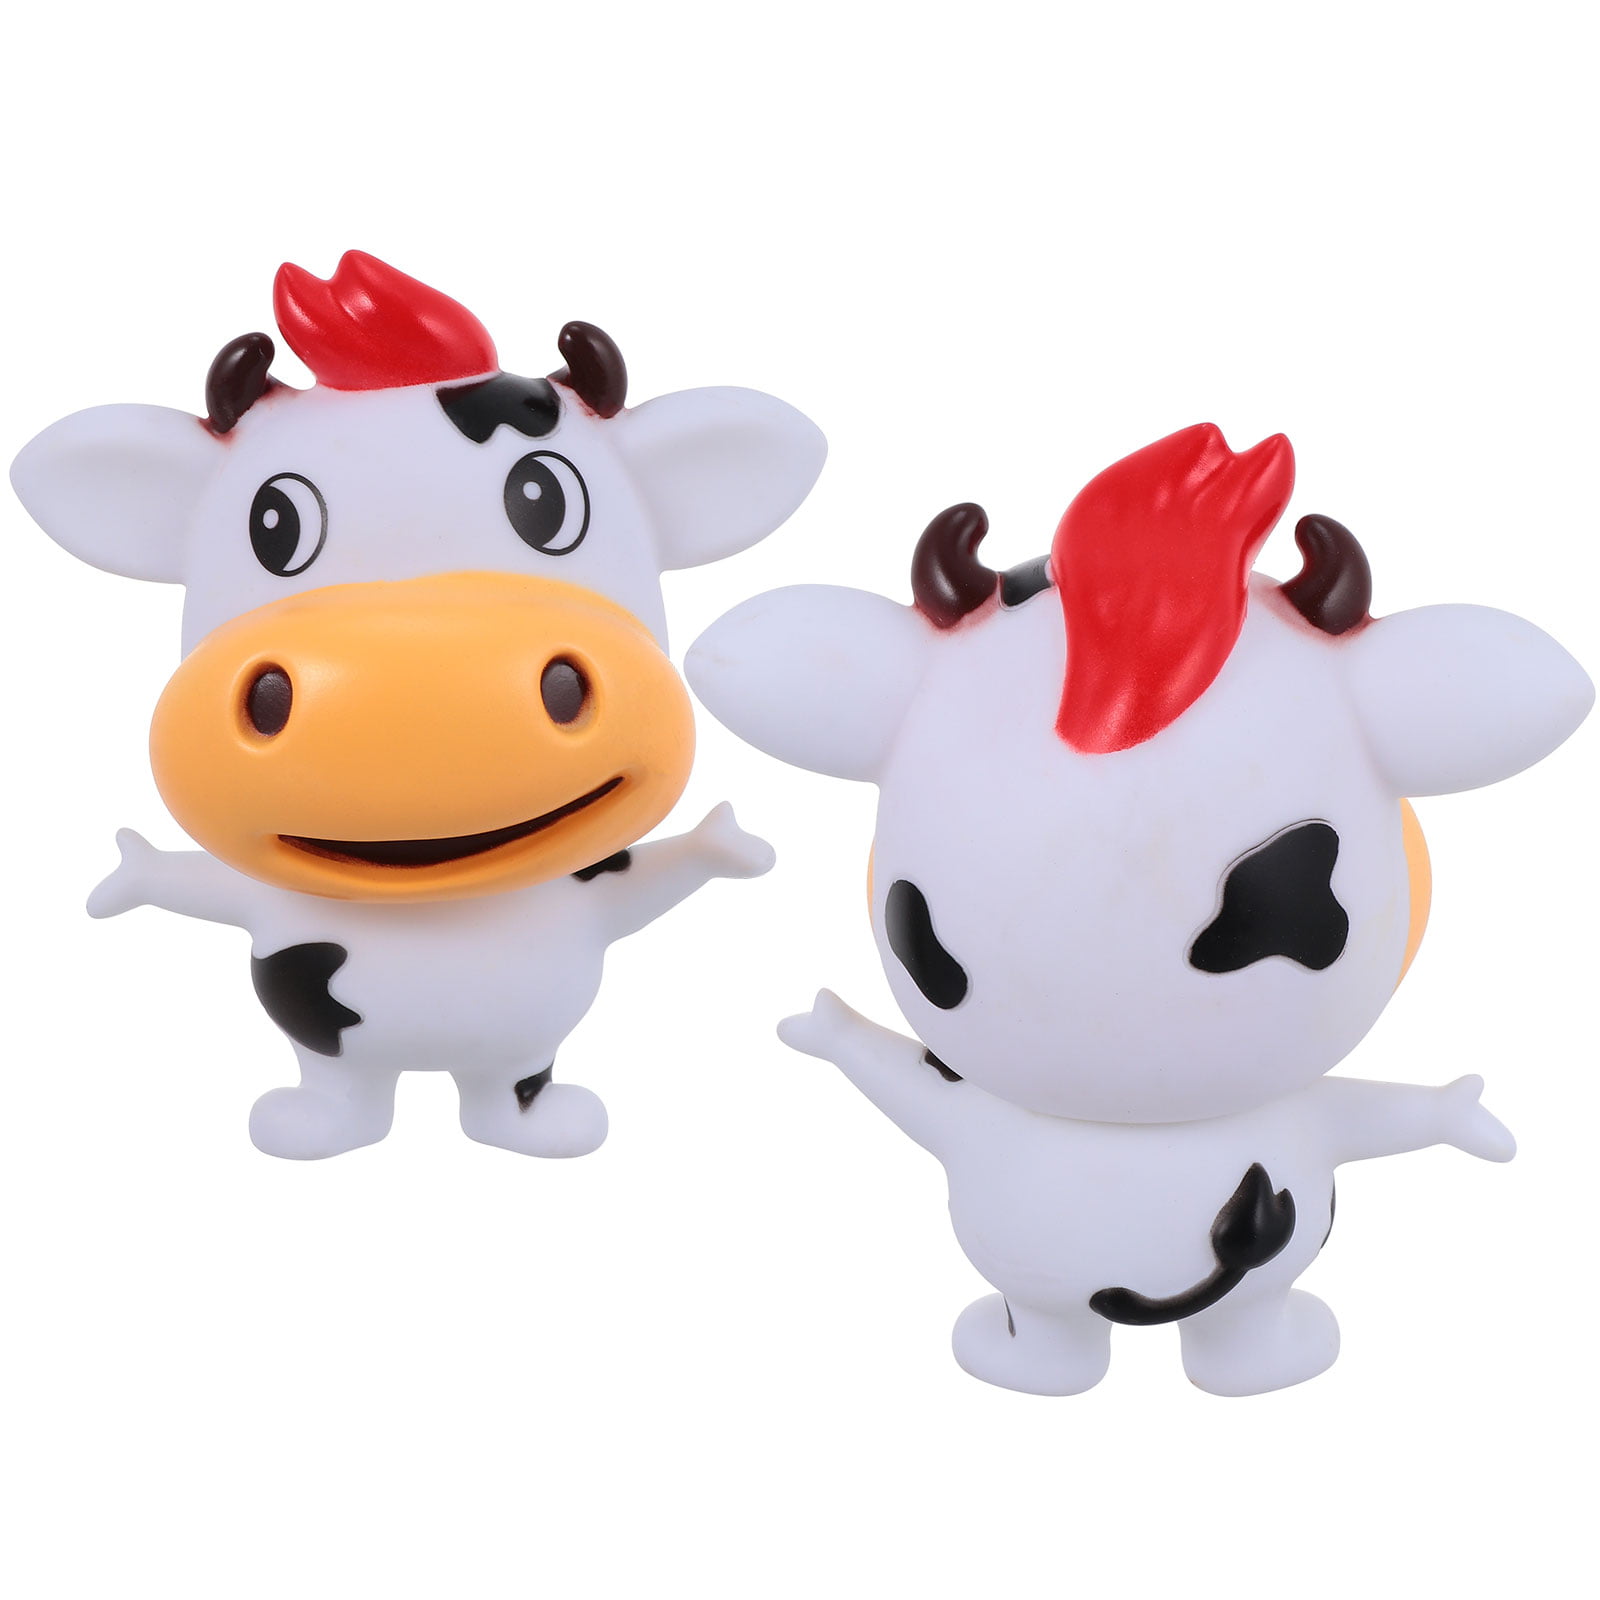 Cartoon Panda Zombie Cow Big Eyes Relieve Stress Anxiety Squeeze Toy Gifts SK 